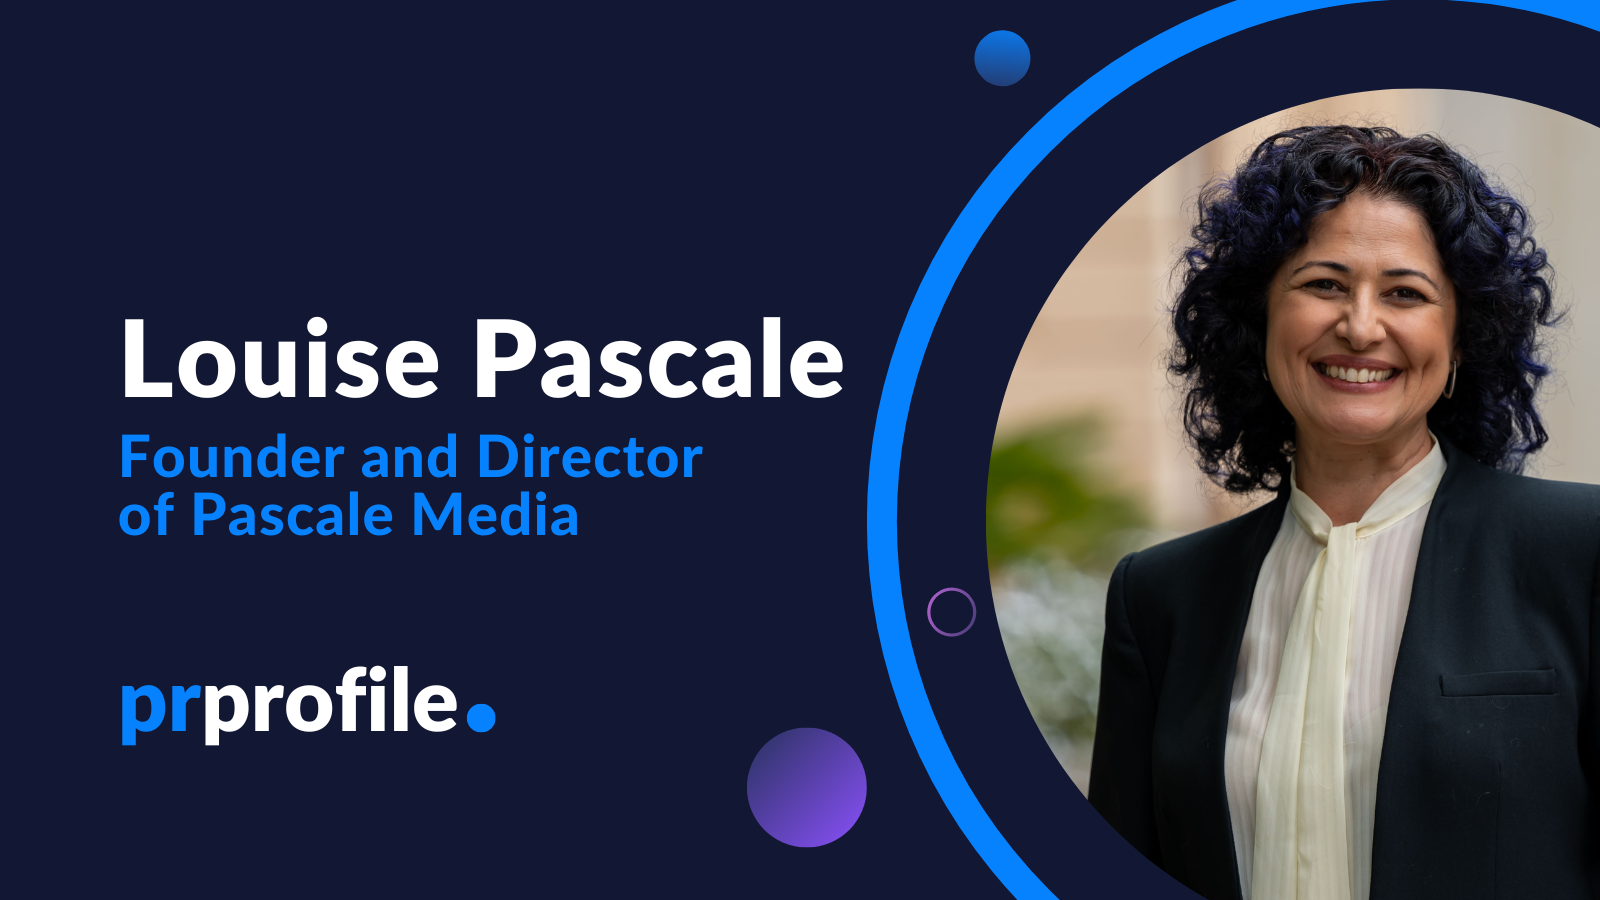 PR Profile | Louise Pascale, Founder and Director of Pascale Media